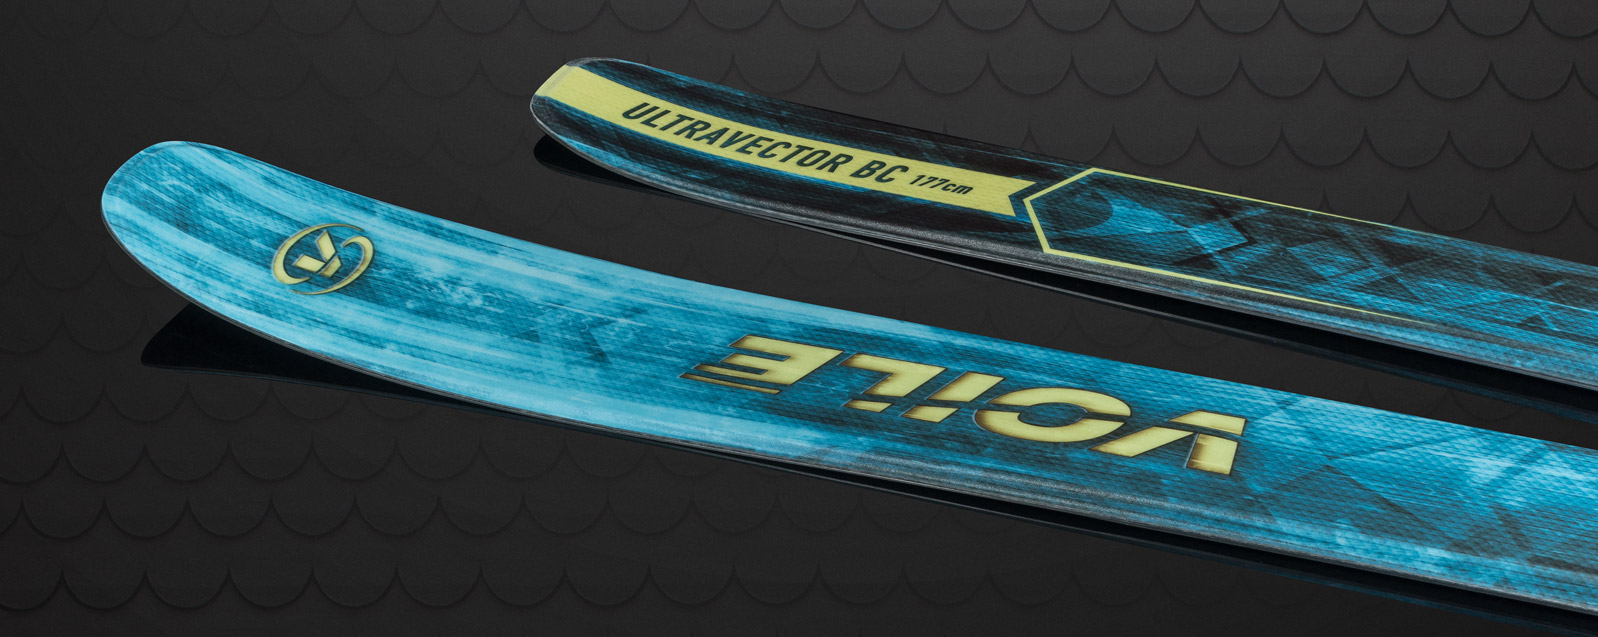 Voile UltraVector BC Skis